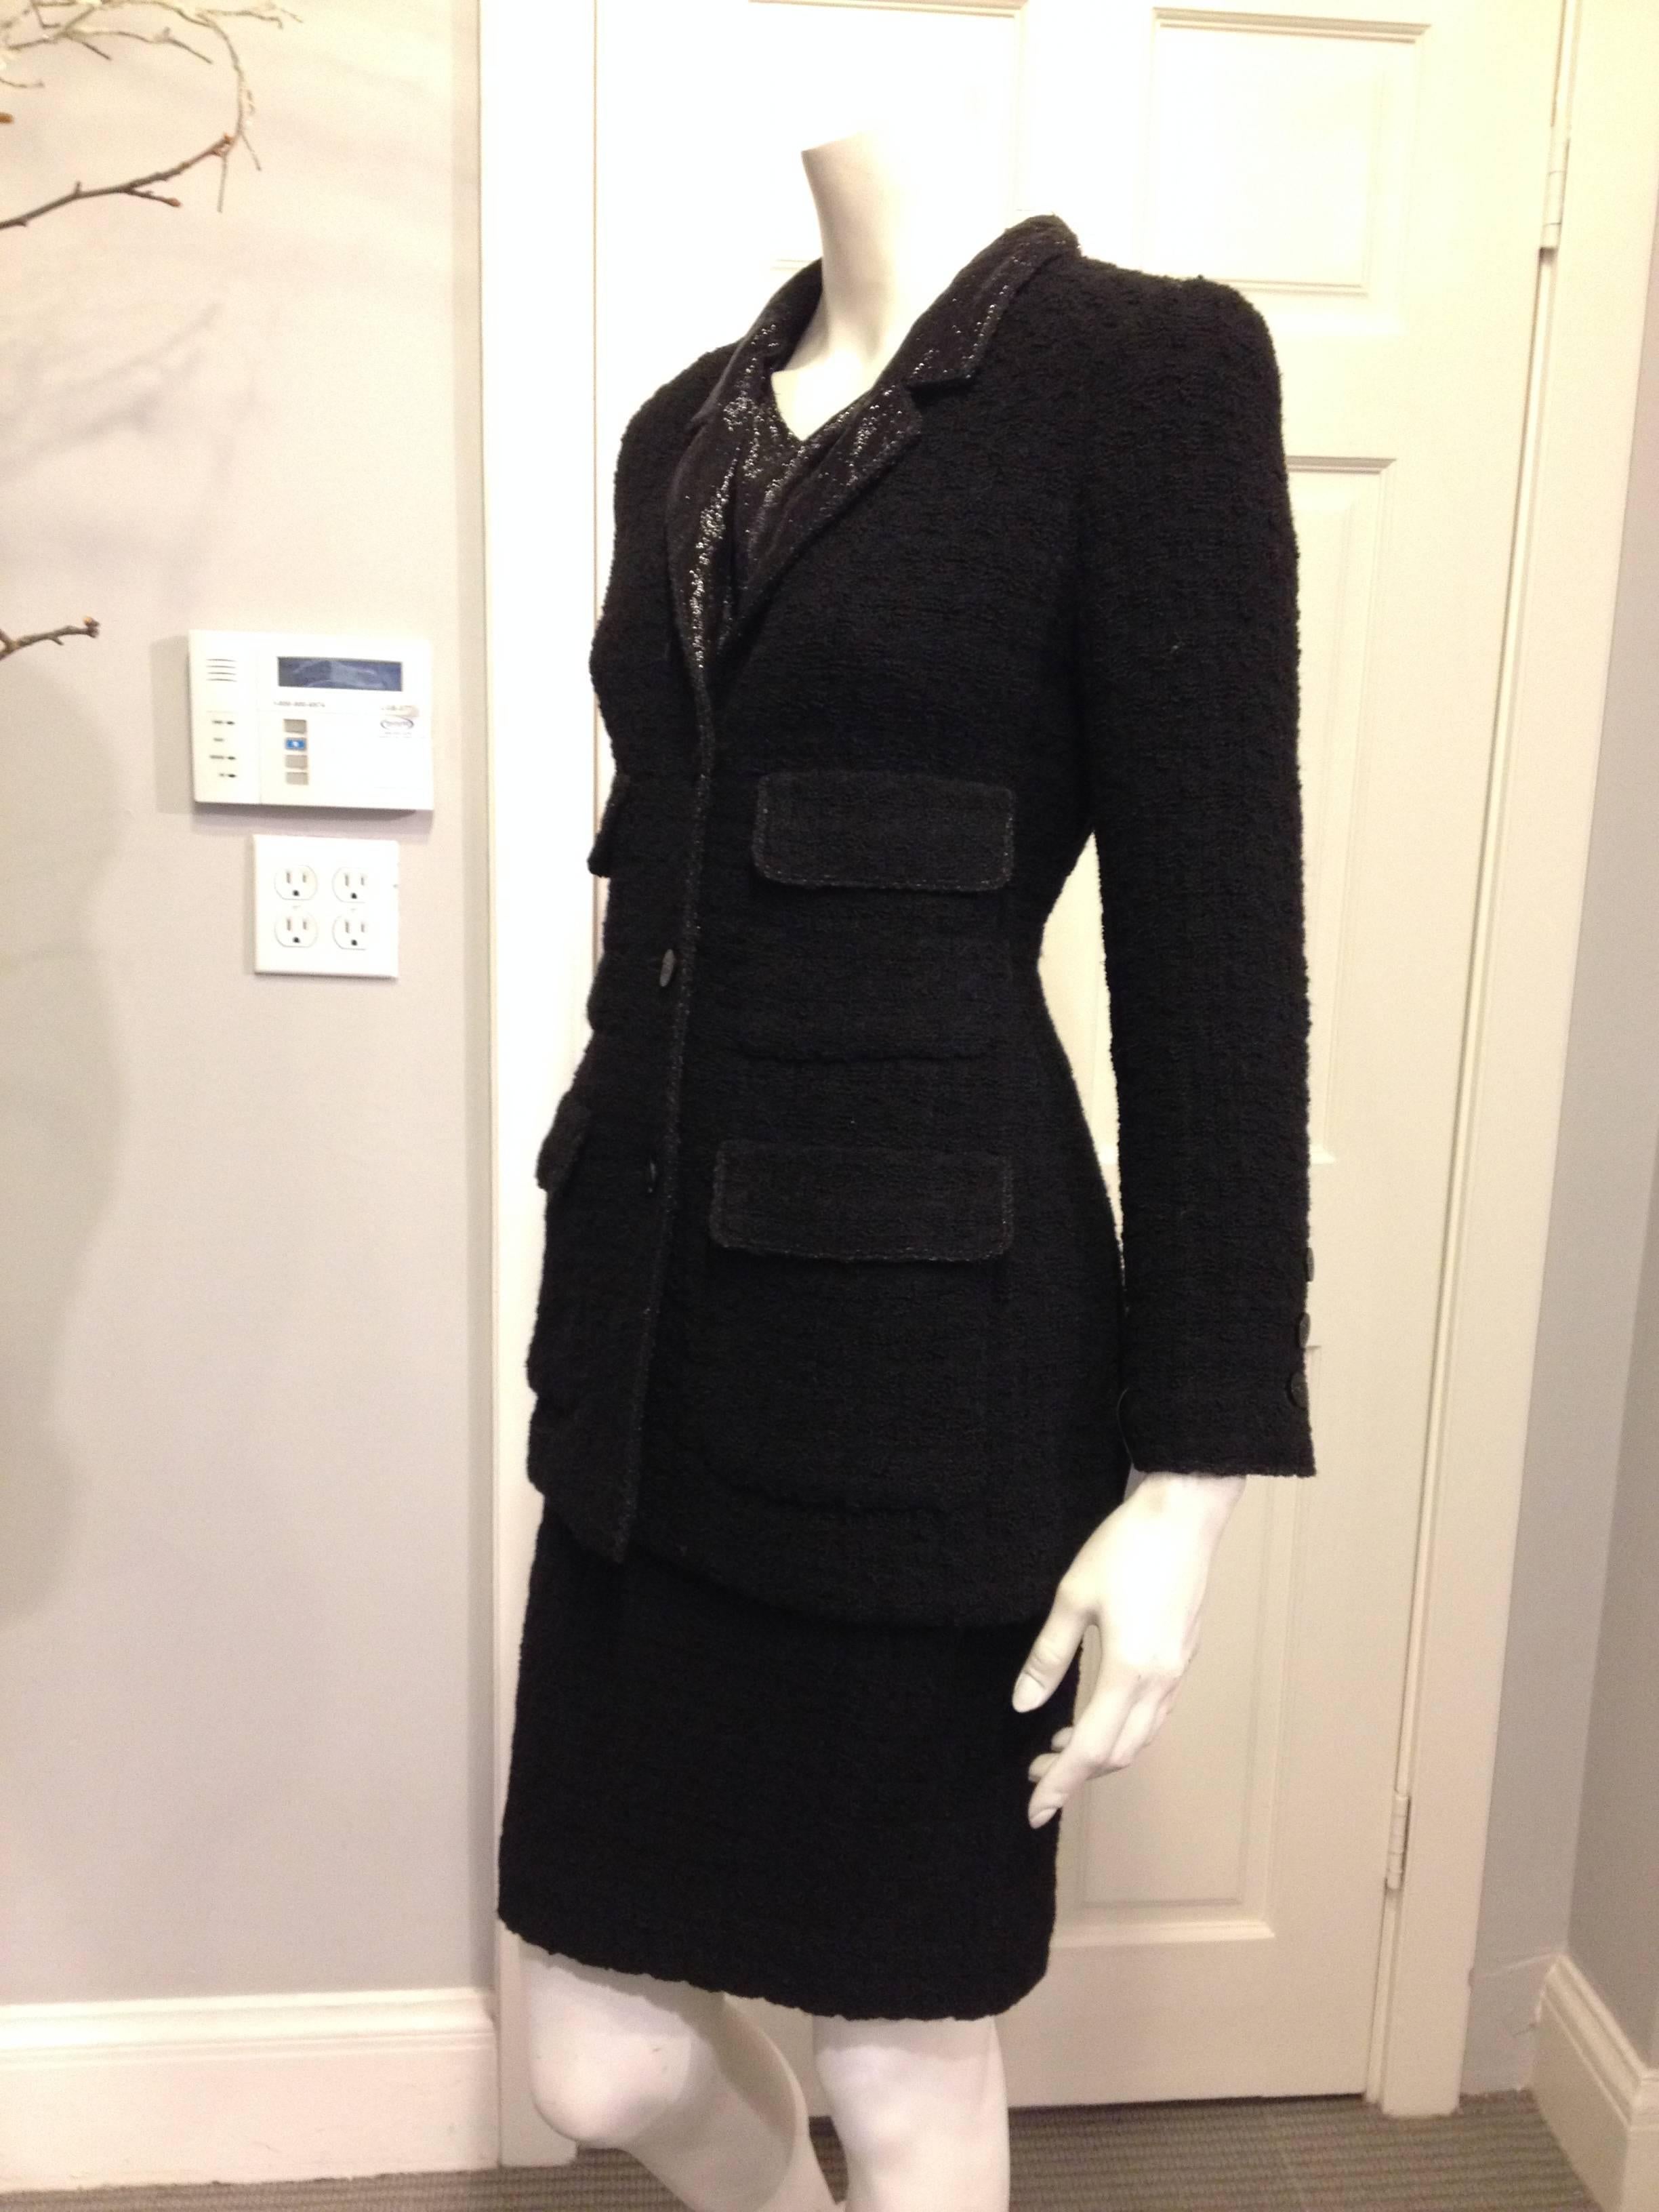 Glamorous but classic at the same time, this three-piece Chanel suit is the ultimate dress-up ensemble. The cut of the jacket is very typically Chanel, with a low hemline, three-button closure, and four pockets on the front of the piece. The skirt